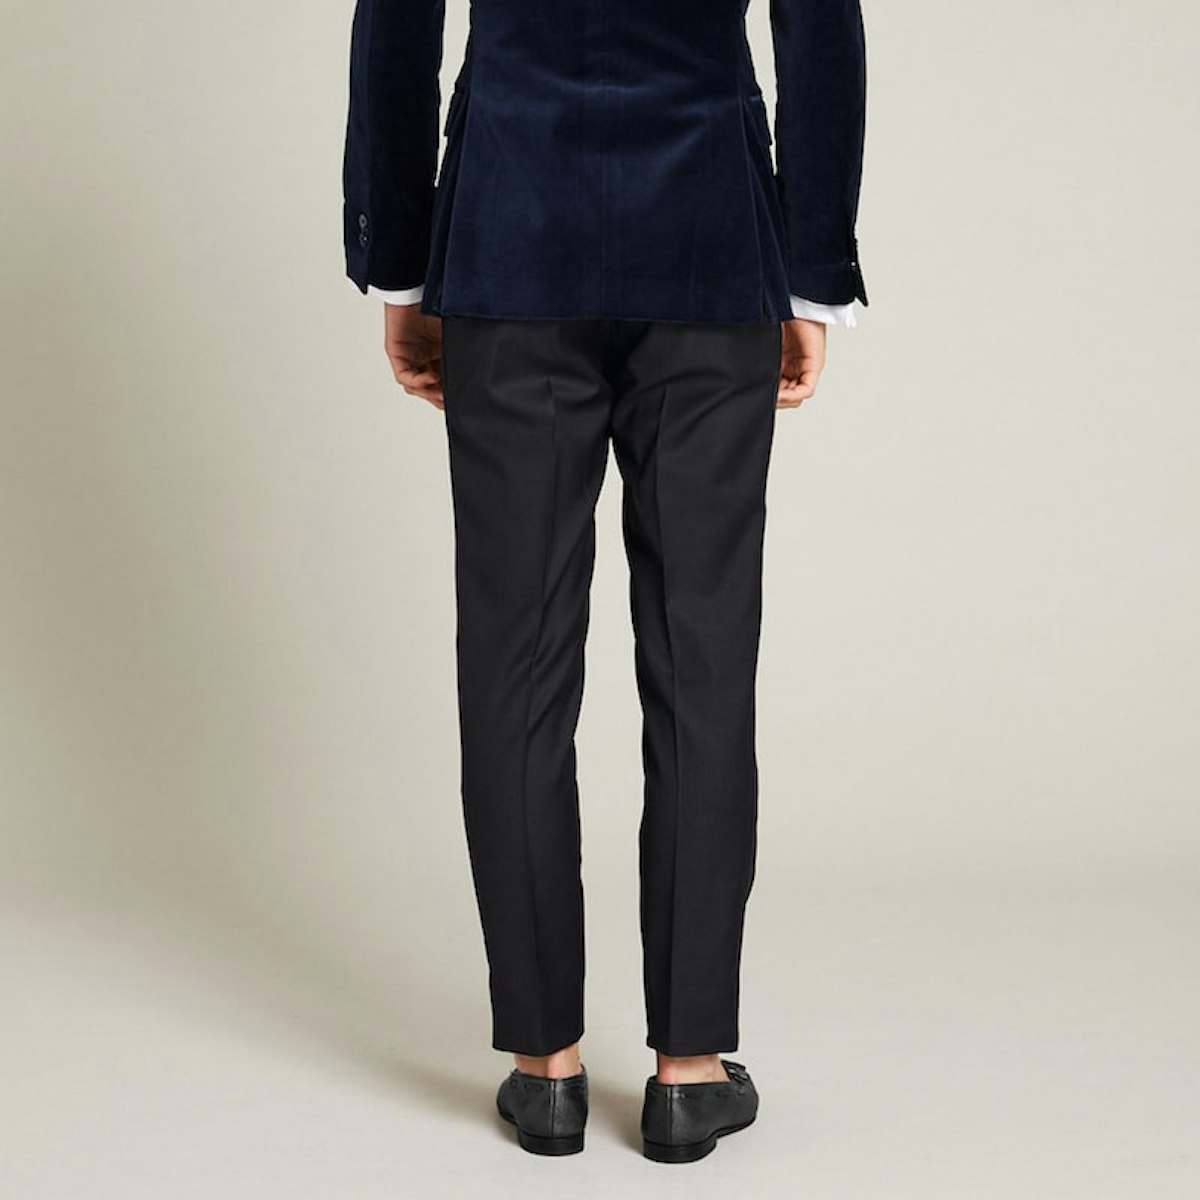 InStitchu Collection The Lapo Black Wool And Satin Tuxedo Pants 